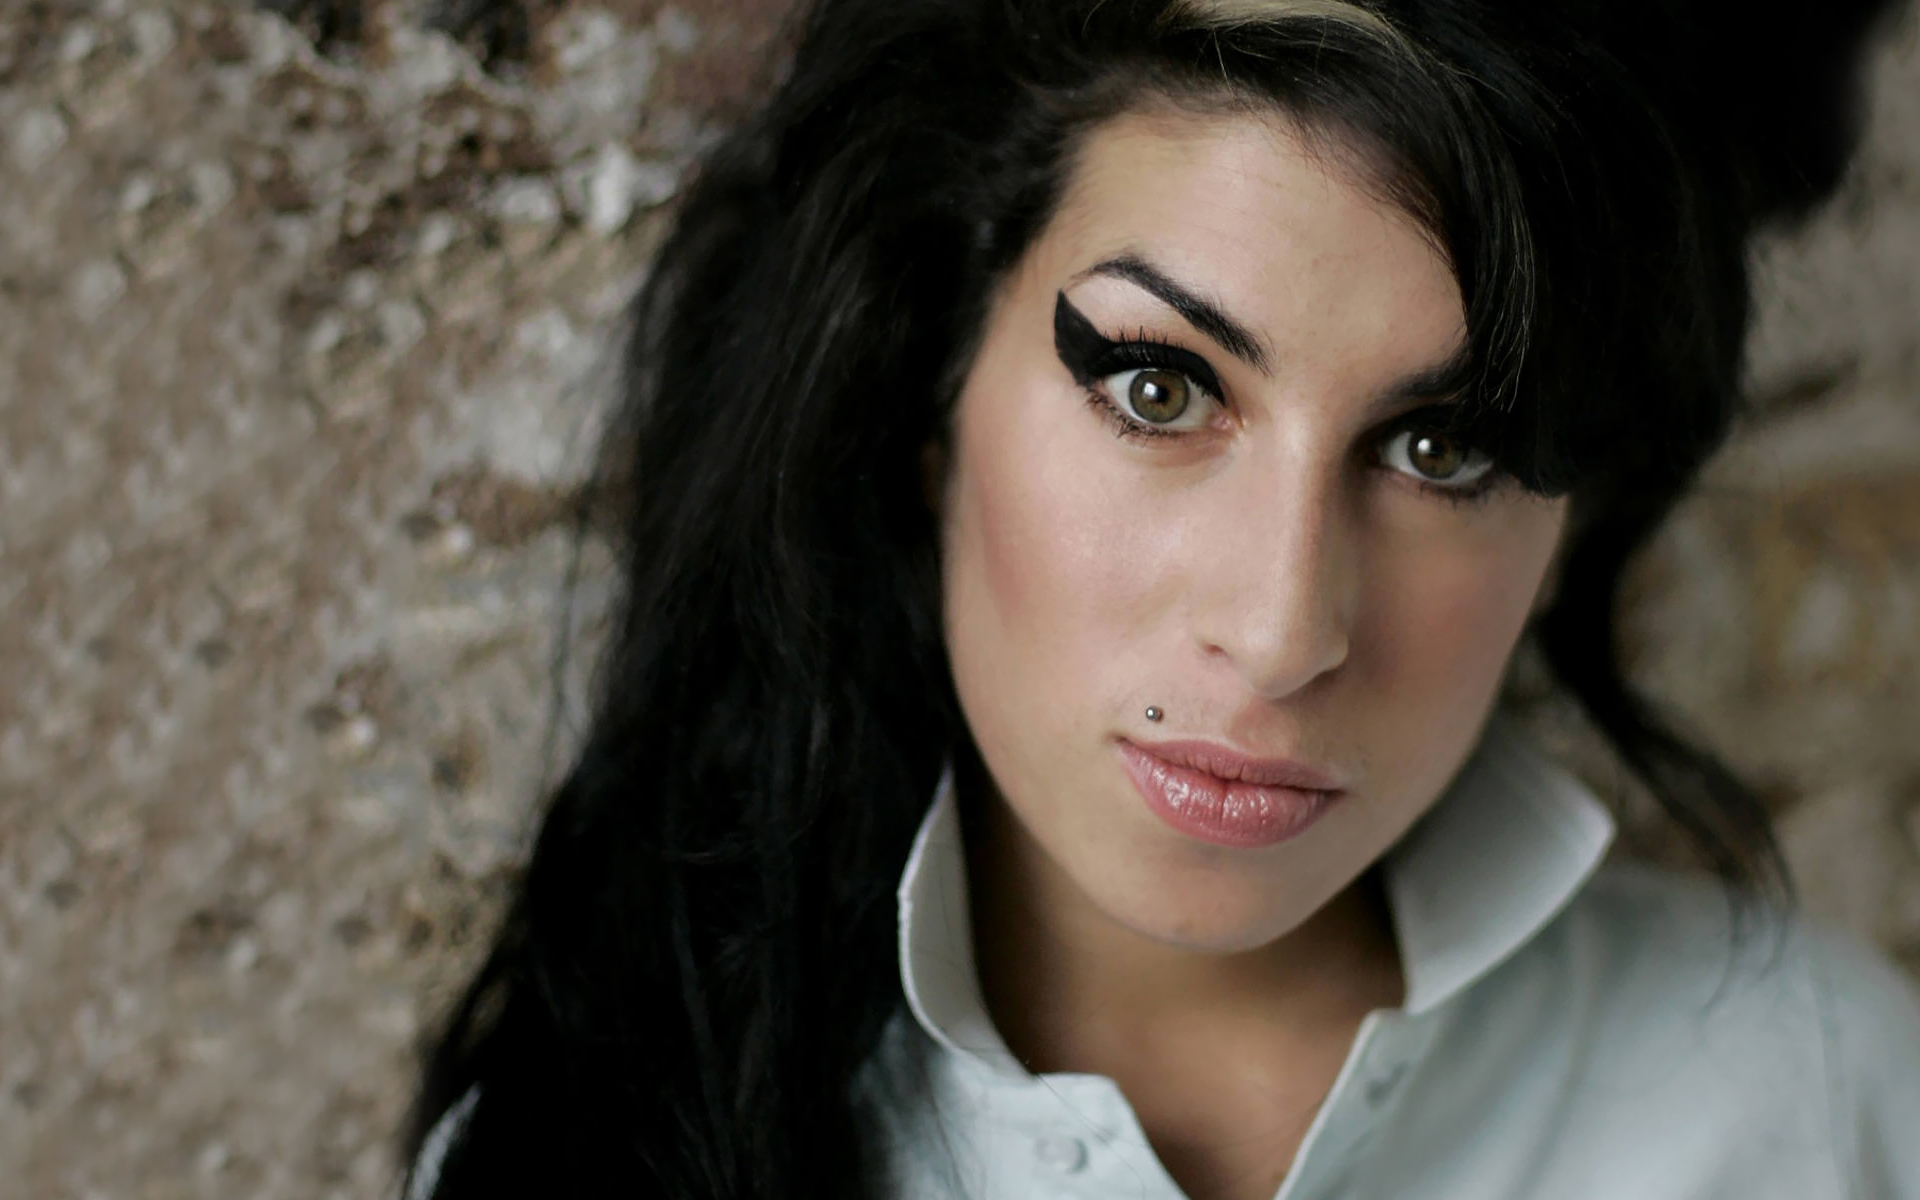 Amy Winehouse - Identifed With BPD